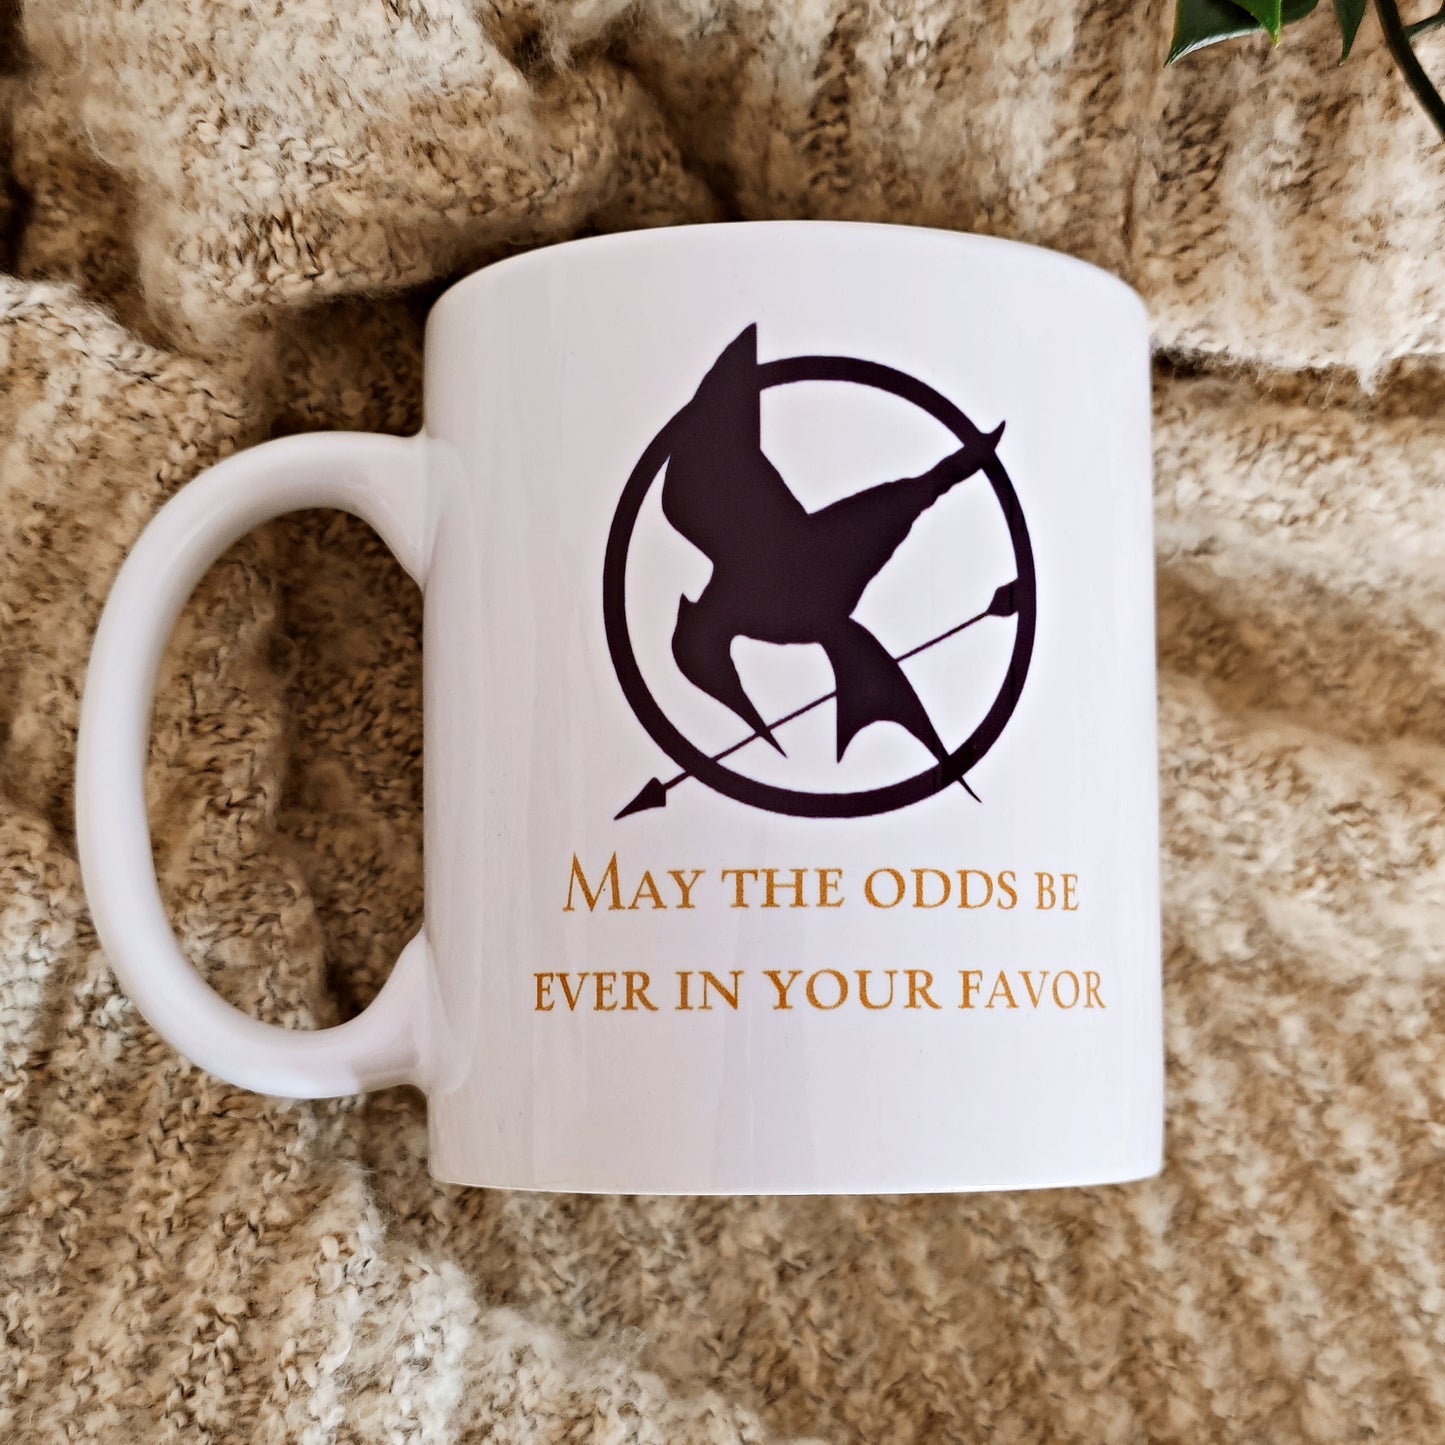 Tazza in ceramica "May the odds be ever in your favor" 325 ml